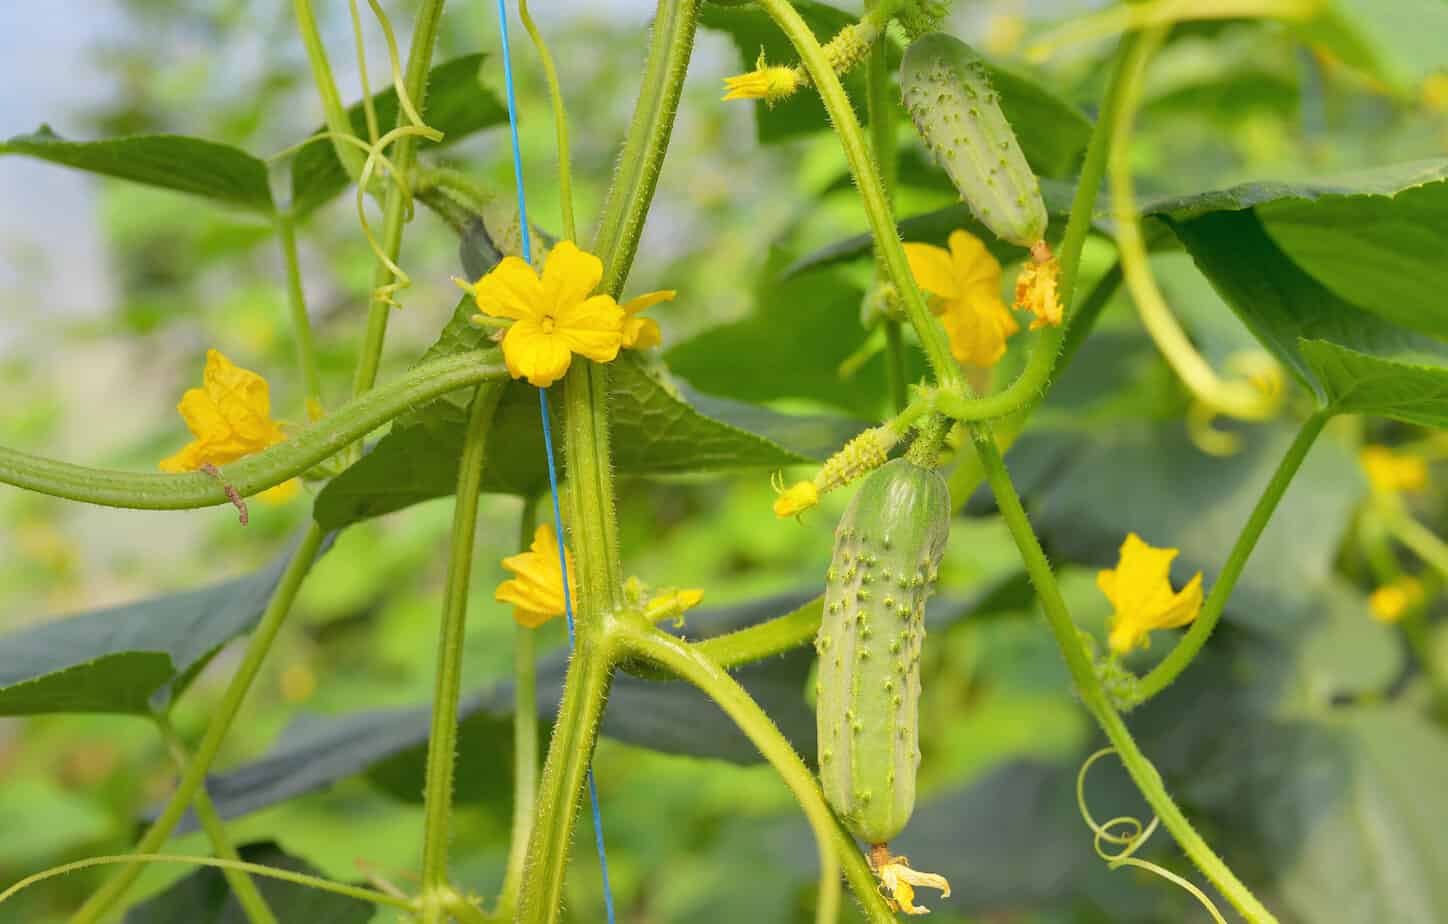 Want to Know why your Cucumbers are Prickly?